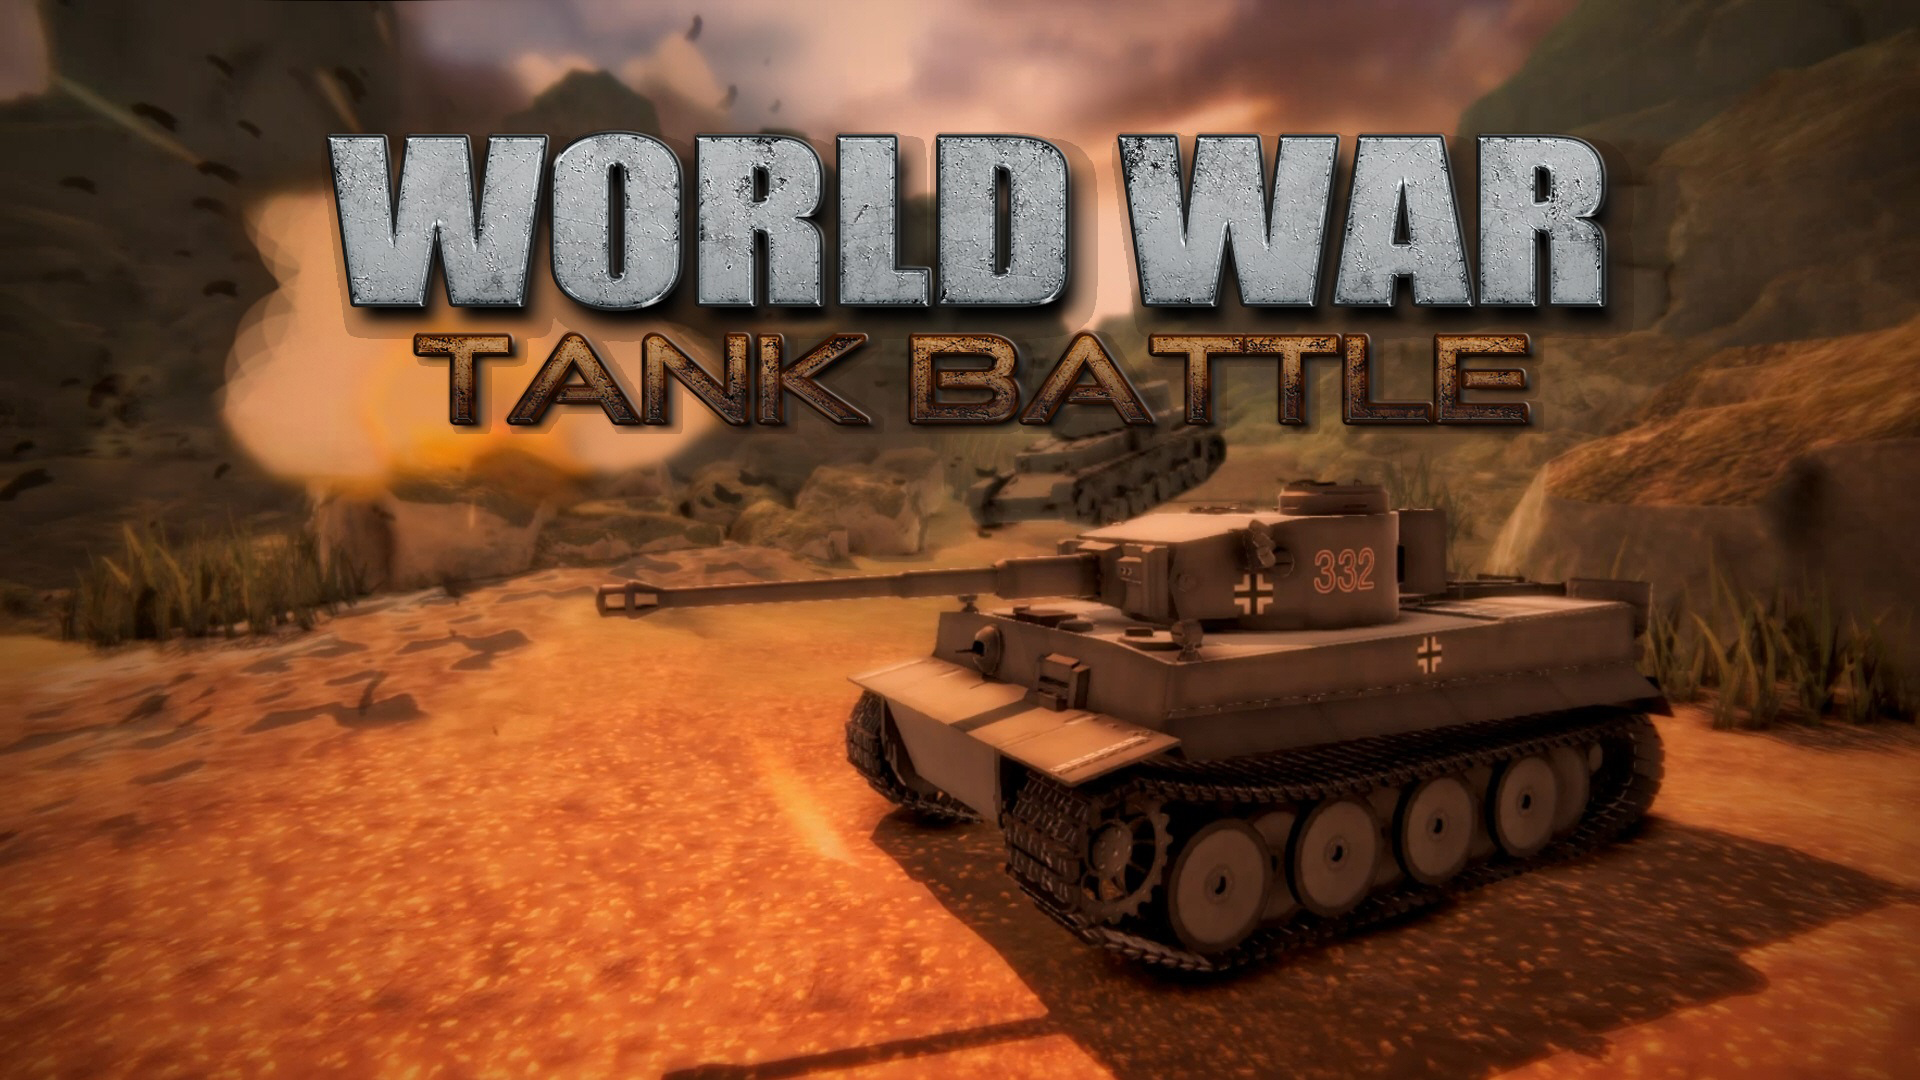 the largest tank battle in the history of warfare